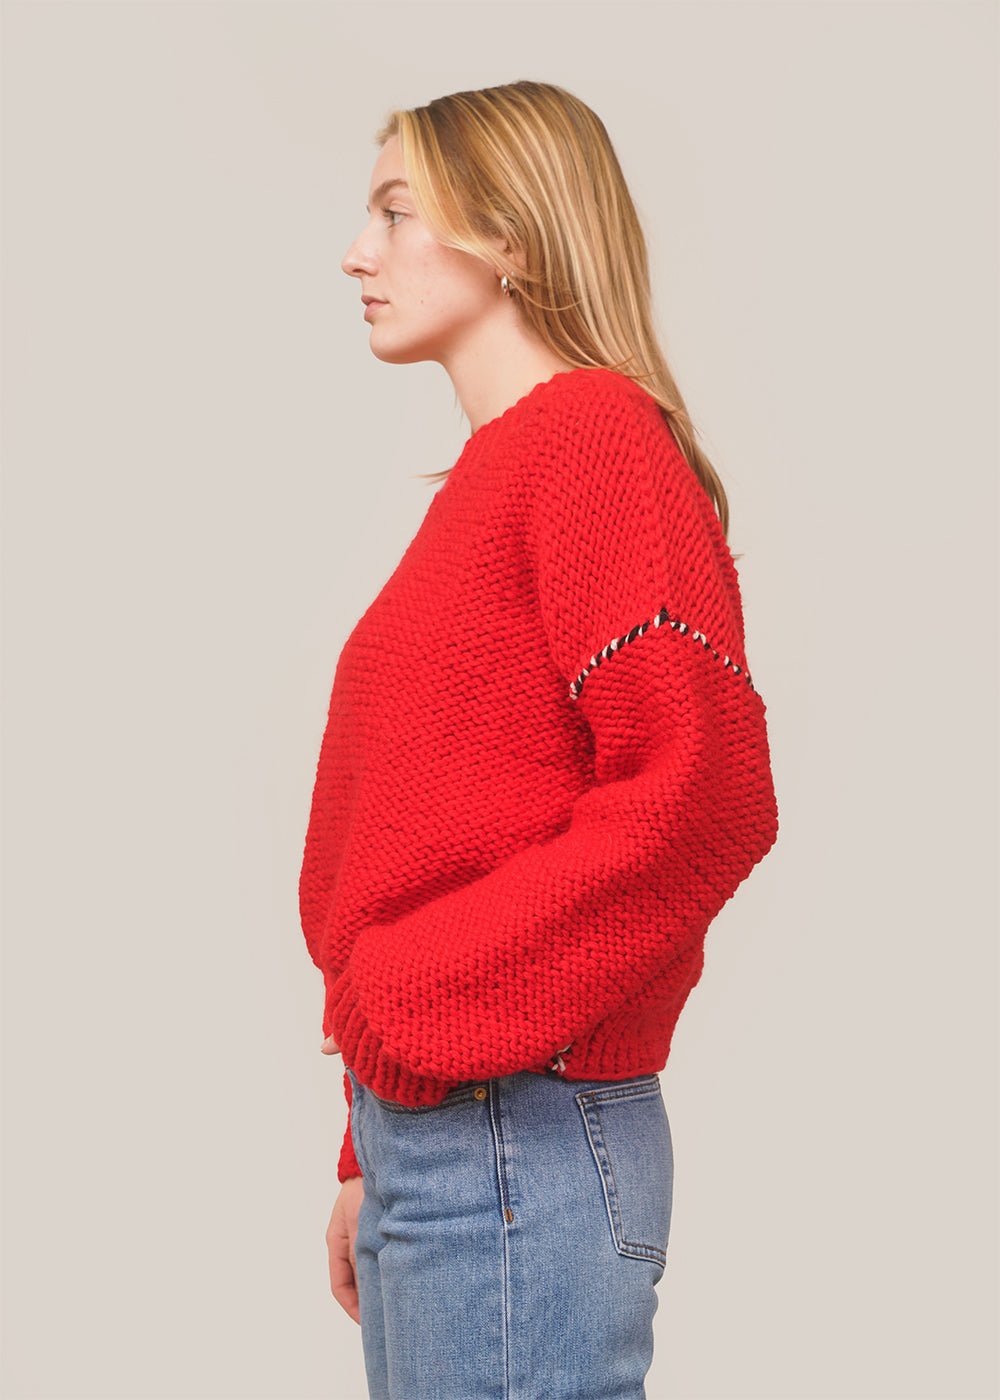 Frisson Knits Red Deconstructed Sweater - New Classics Studios Sustainable Ethical Fashion Canada